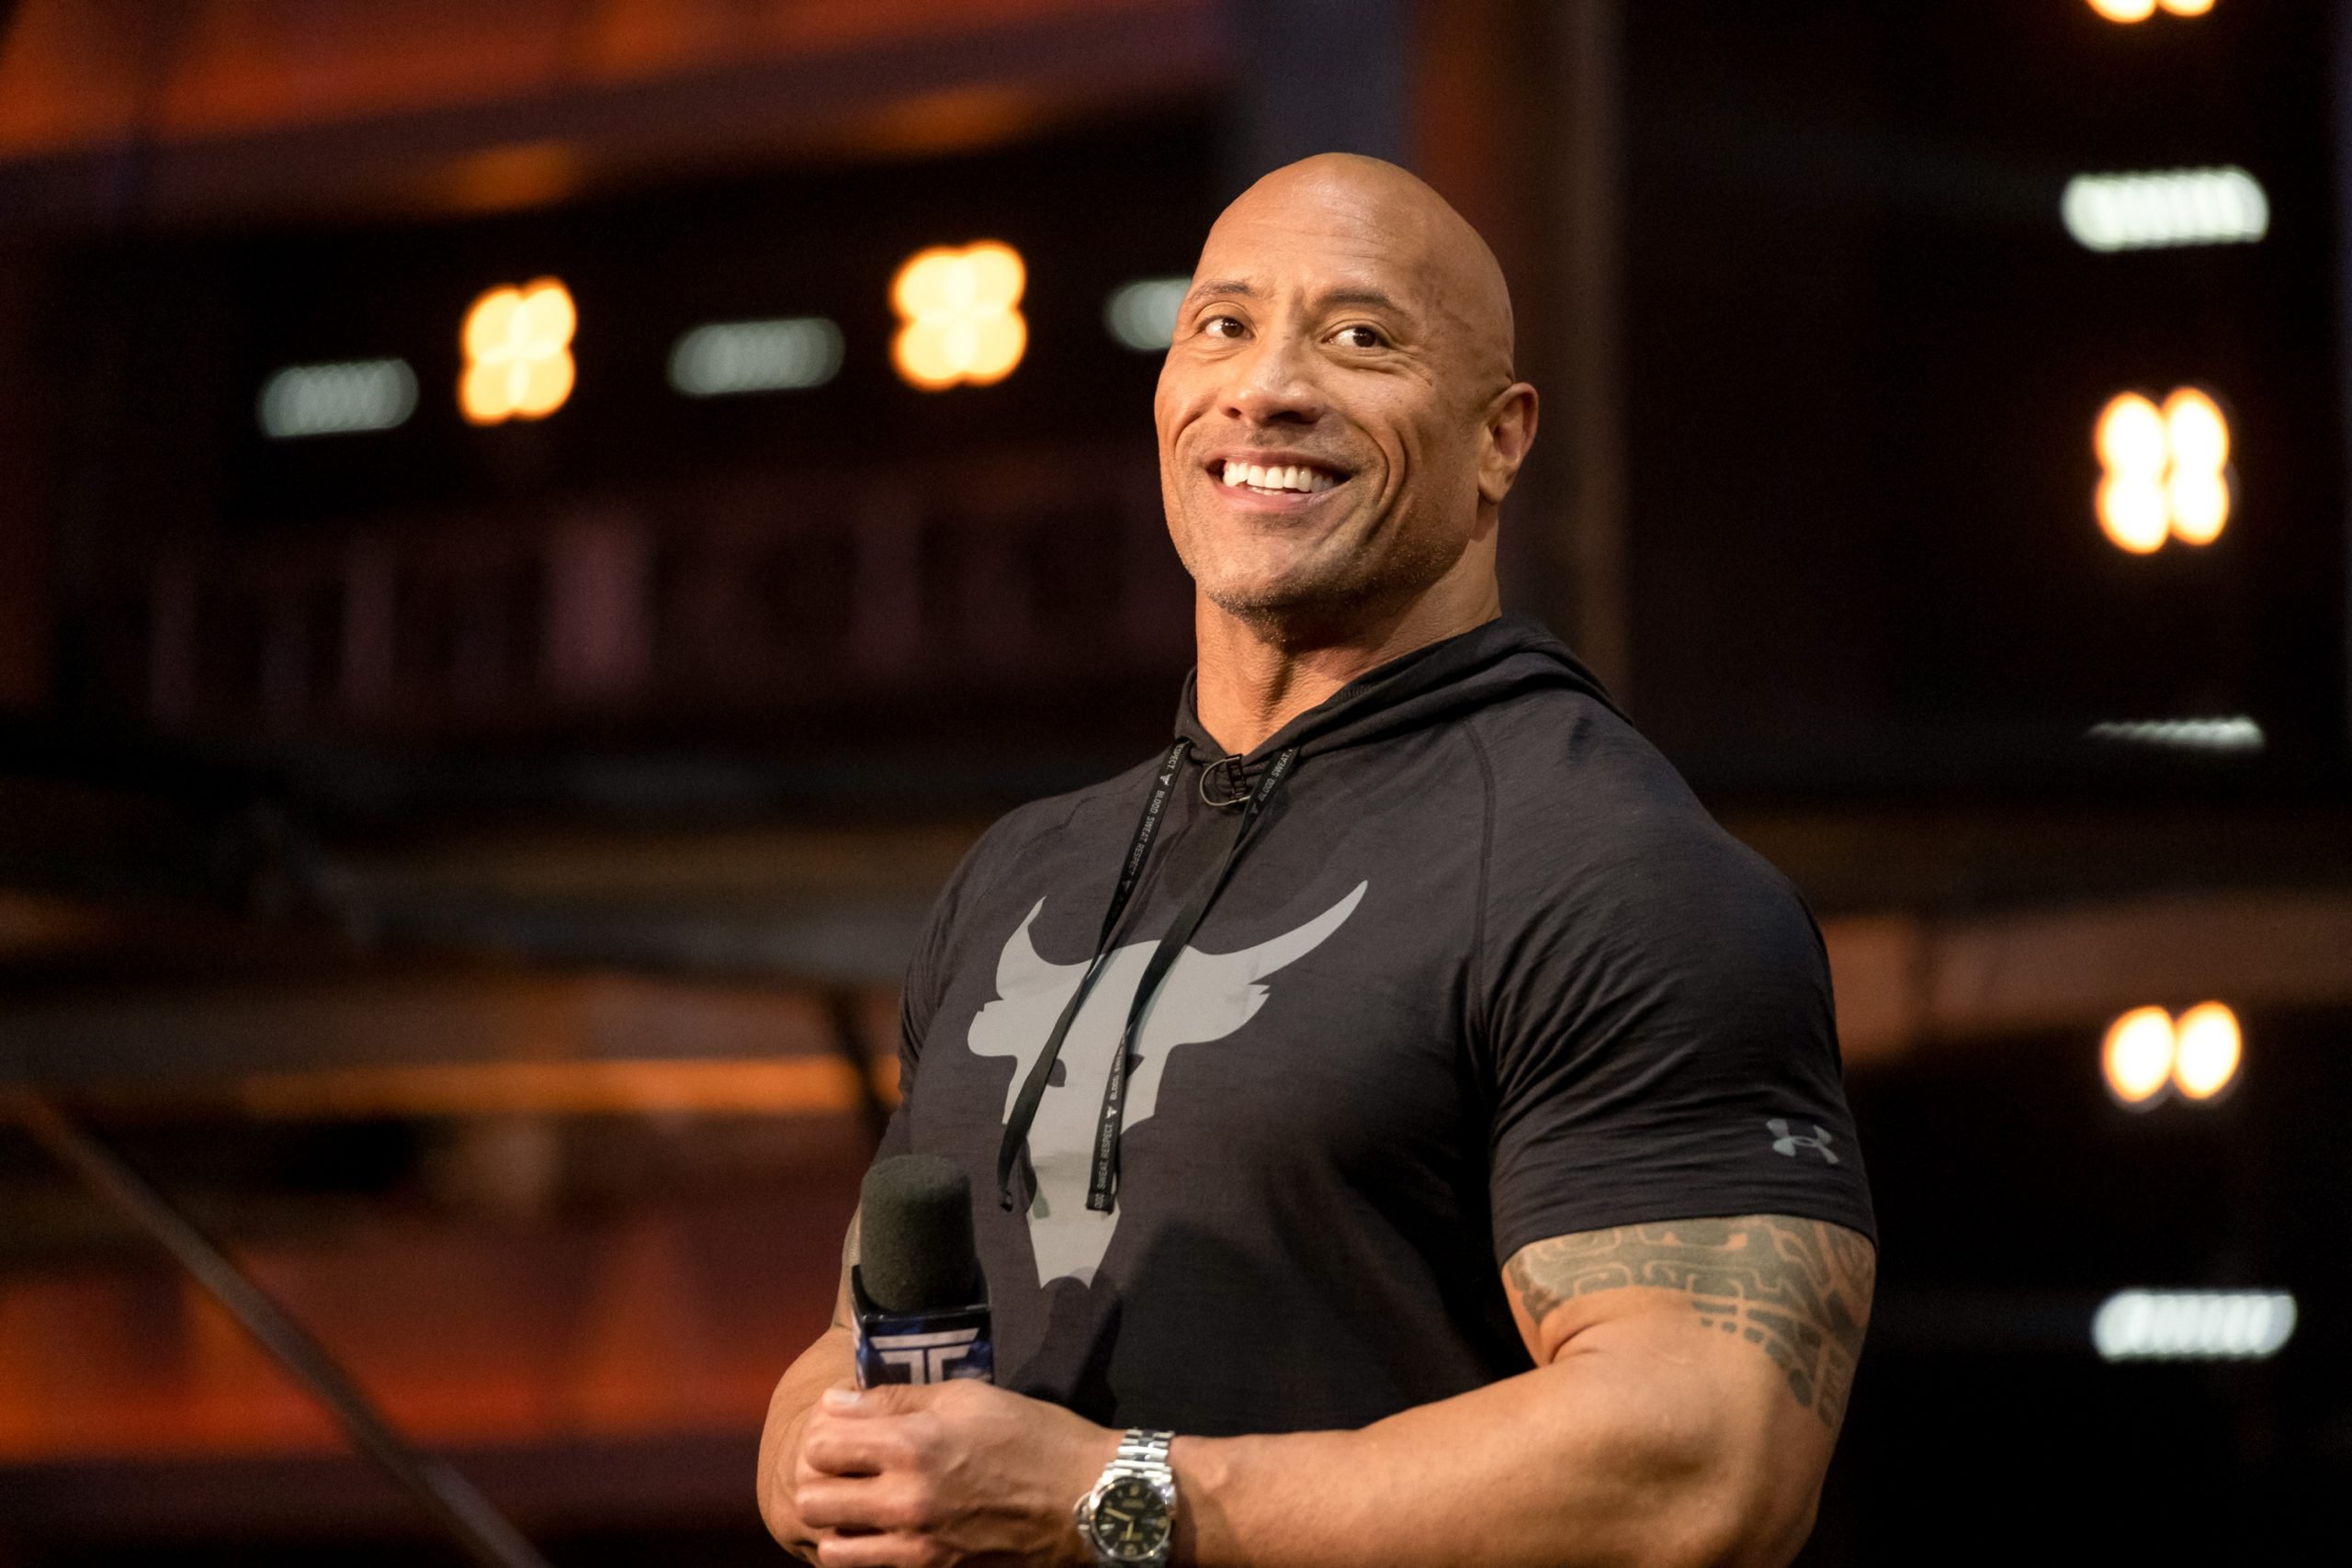 Does The Rock Have a Twin? - EssentiallySports